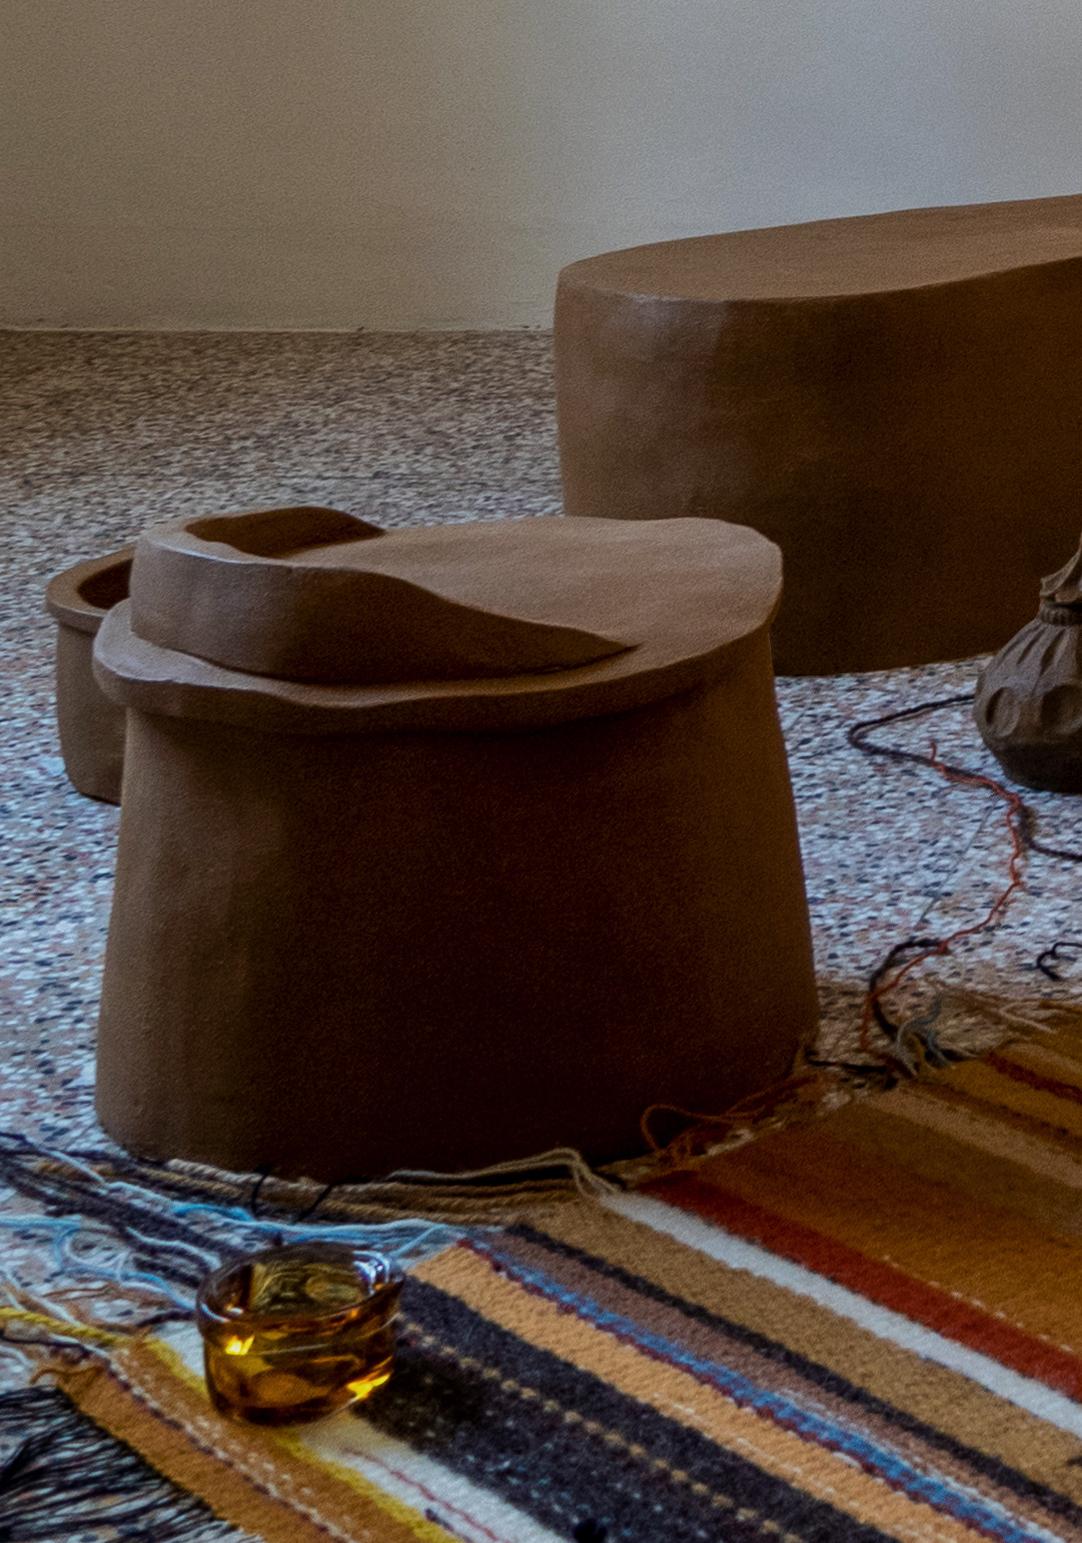 Integral part, III

Inspired by the Mediterranean, by the Maghreb Ksar, with seats made entirely of raw land, natural oils, and waxes. They are a metaphor and abstraction of the typical Moroccan collective dwellings, in which spaces - or even